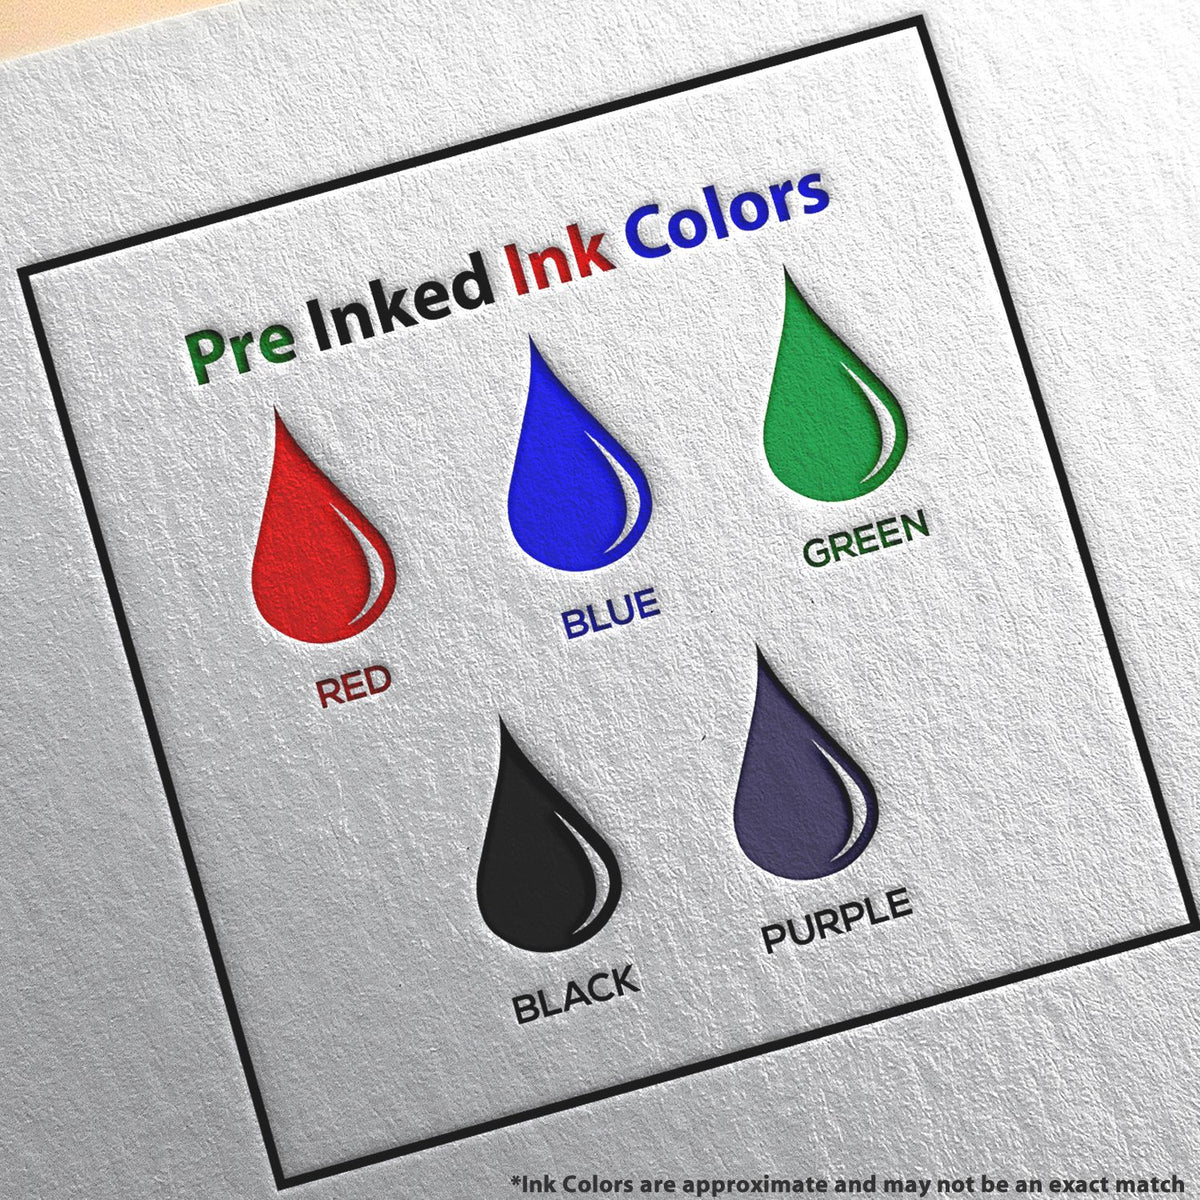 A picture showing the different ink colors or hues available for the PSI West Virginia Notary Stamp product.